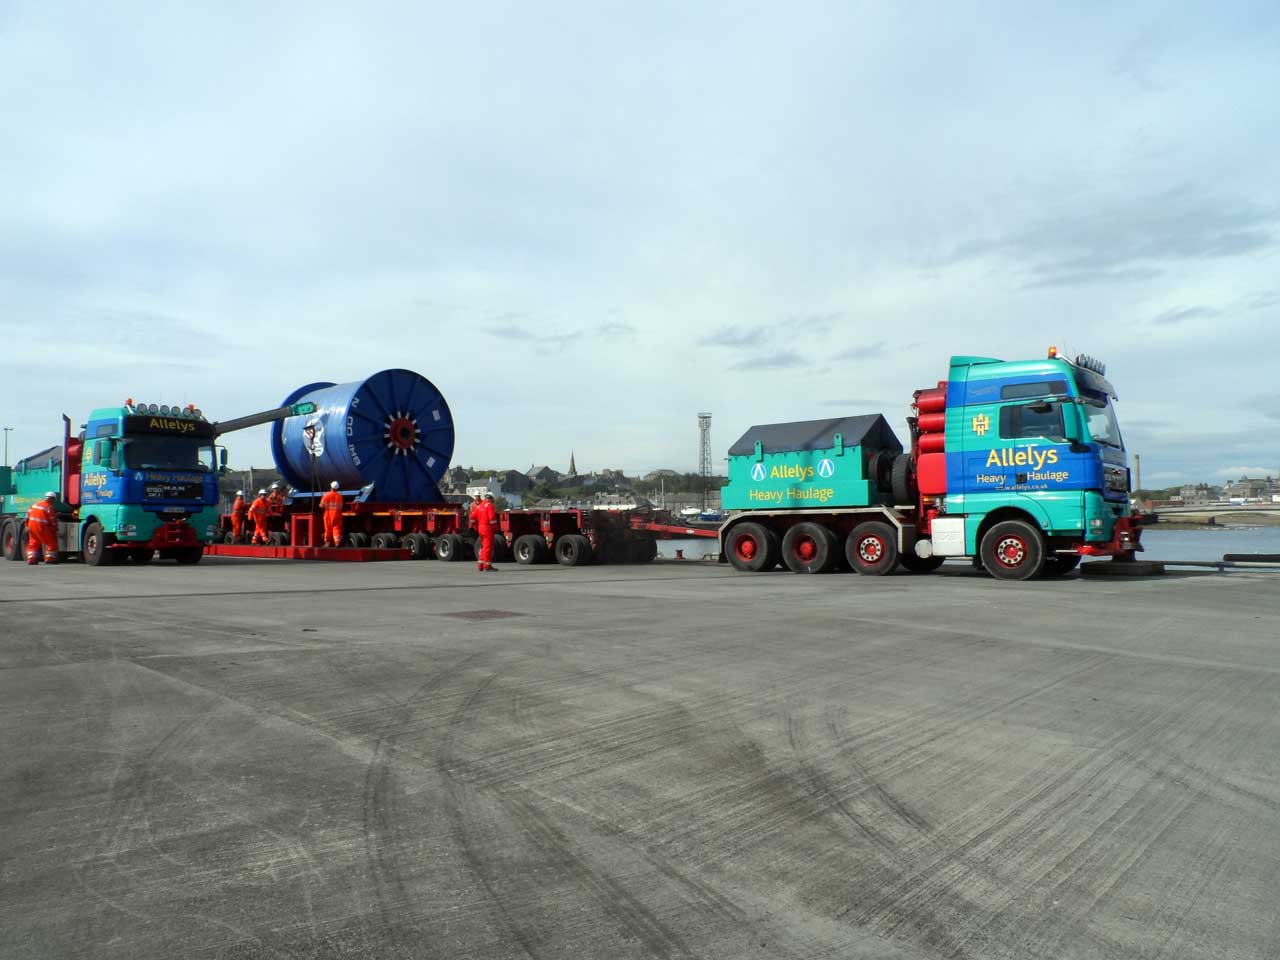 Photo: 170 Tonne Cable At Wick Bound For Subsea7 At Wester